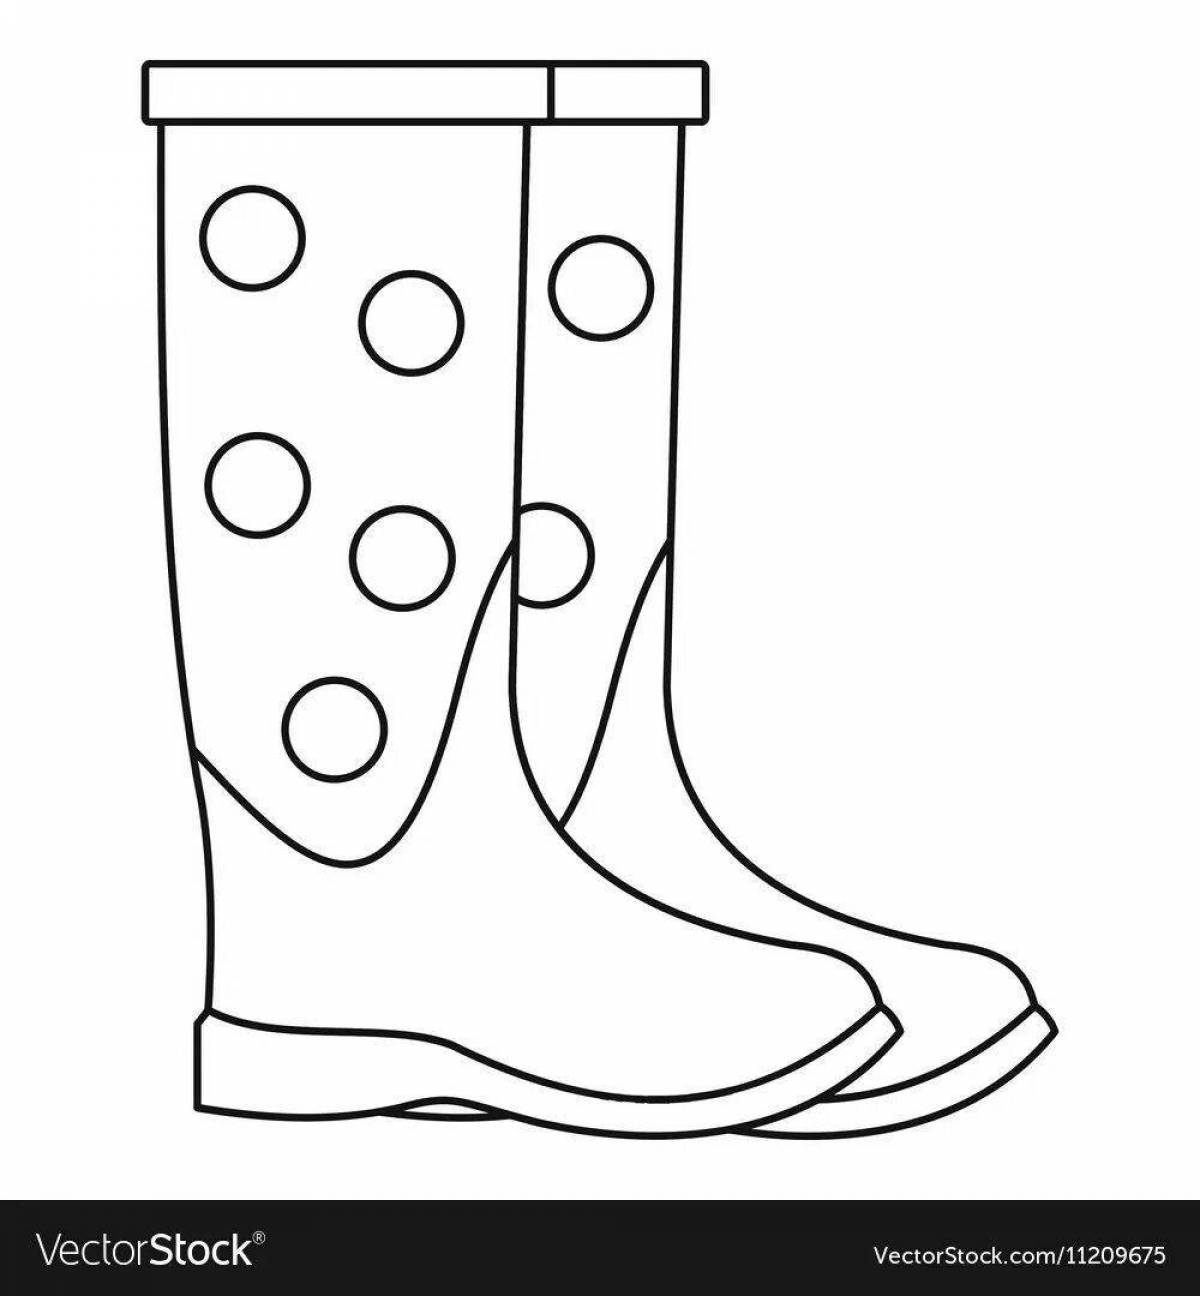 Fantastic coloring page of baby boots